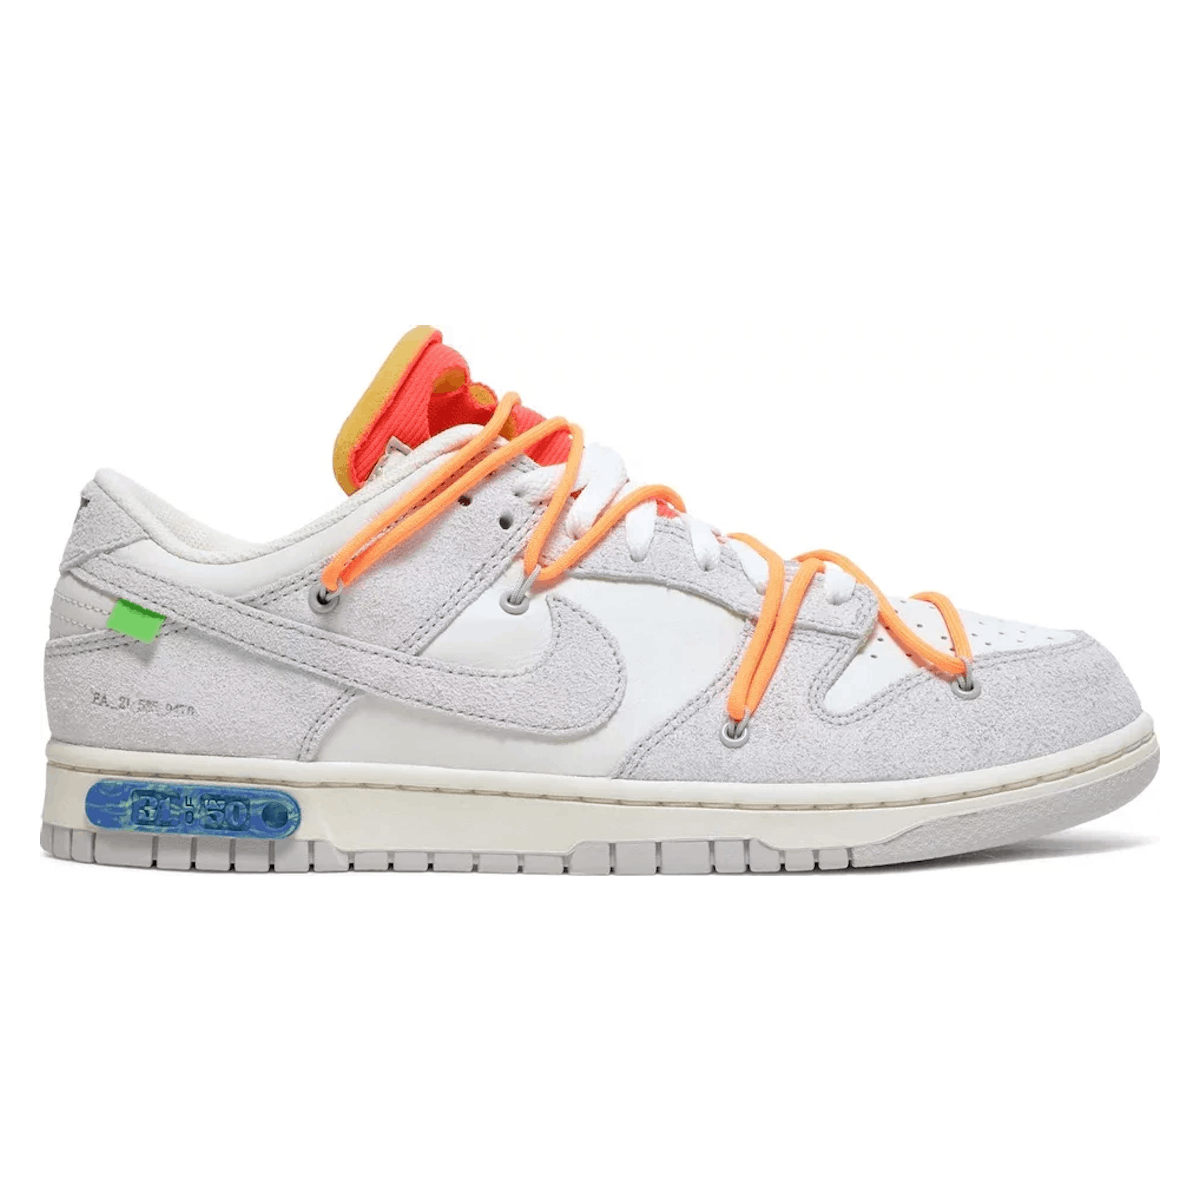 Off-White x Nike Dunk Low "Lot 31 of 50"